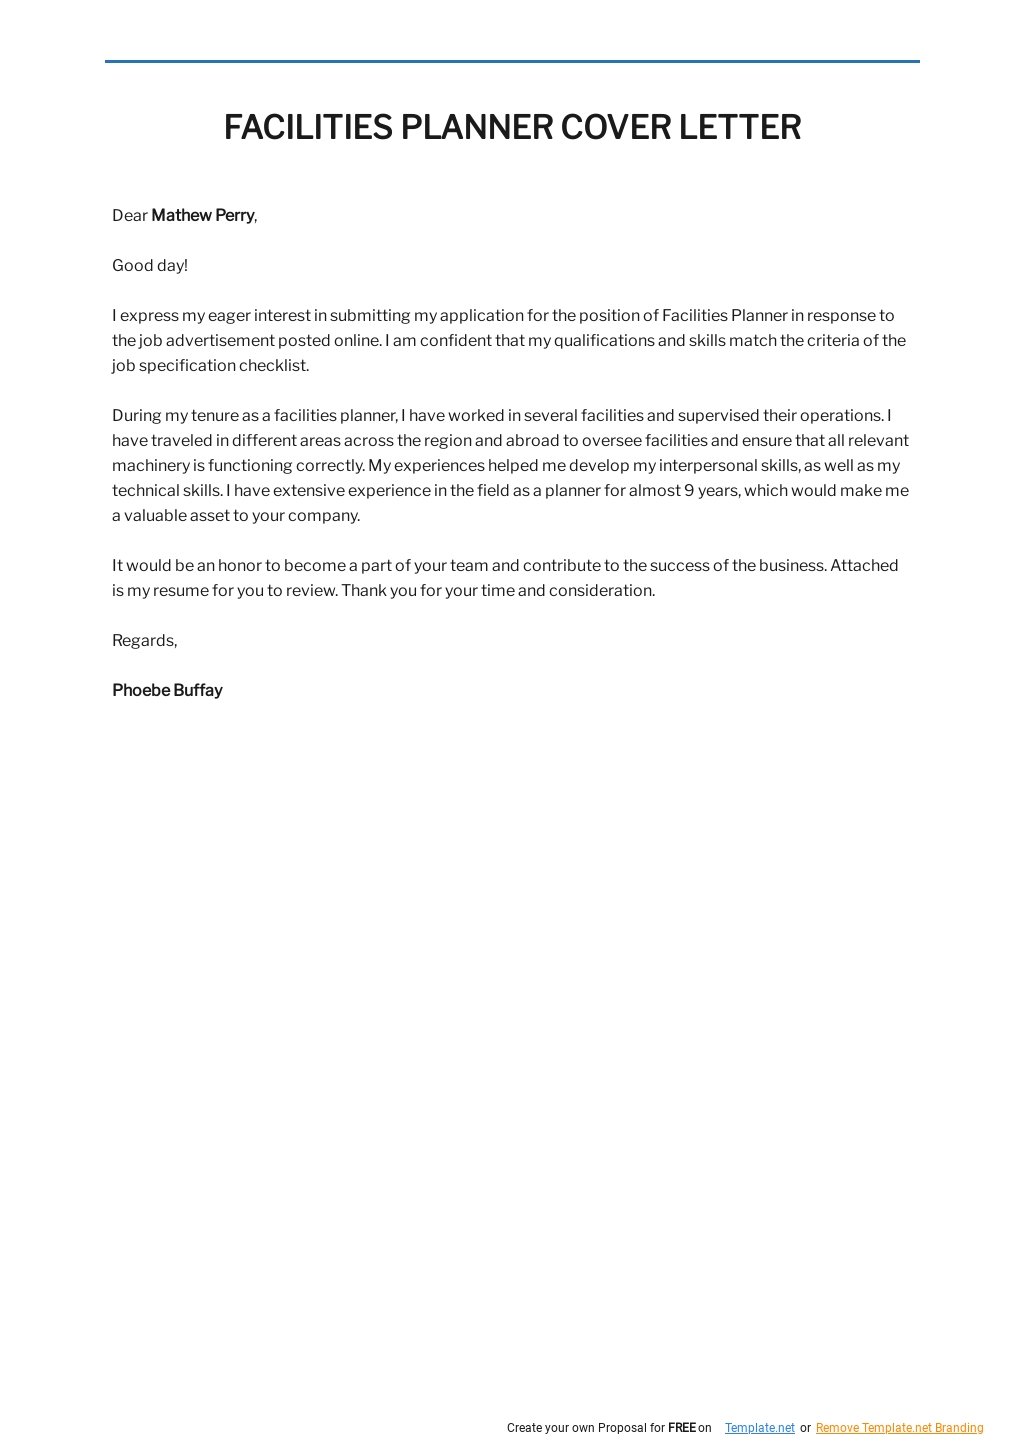 Facilities Planner Cover Letter Template.jpe